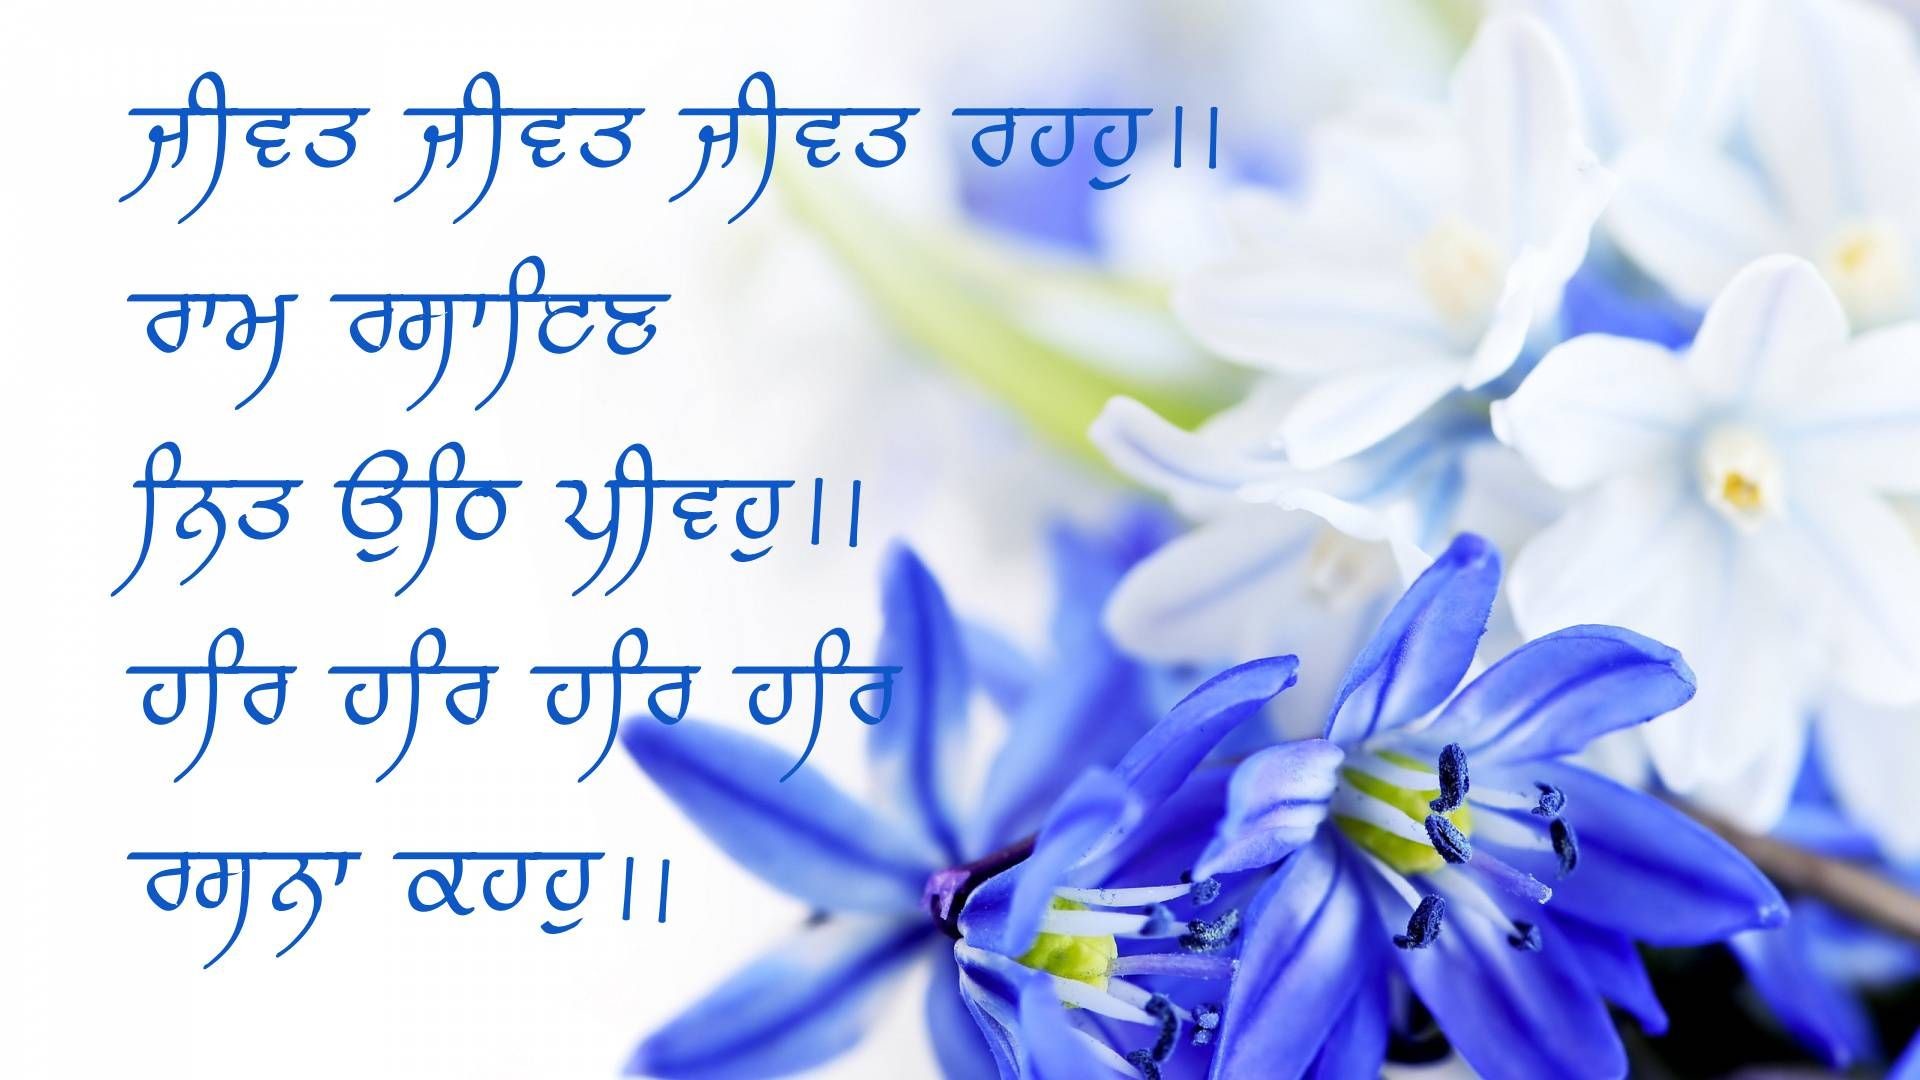 Birthday Wish Gurbani Wallpaper For Desktop - Happy New Year Images With Flowers - HD Wallpaper 